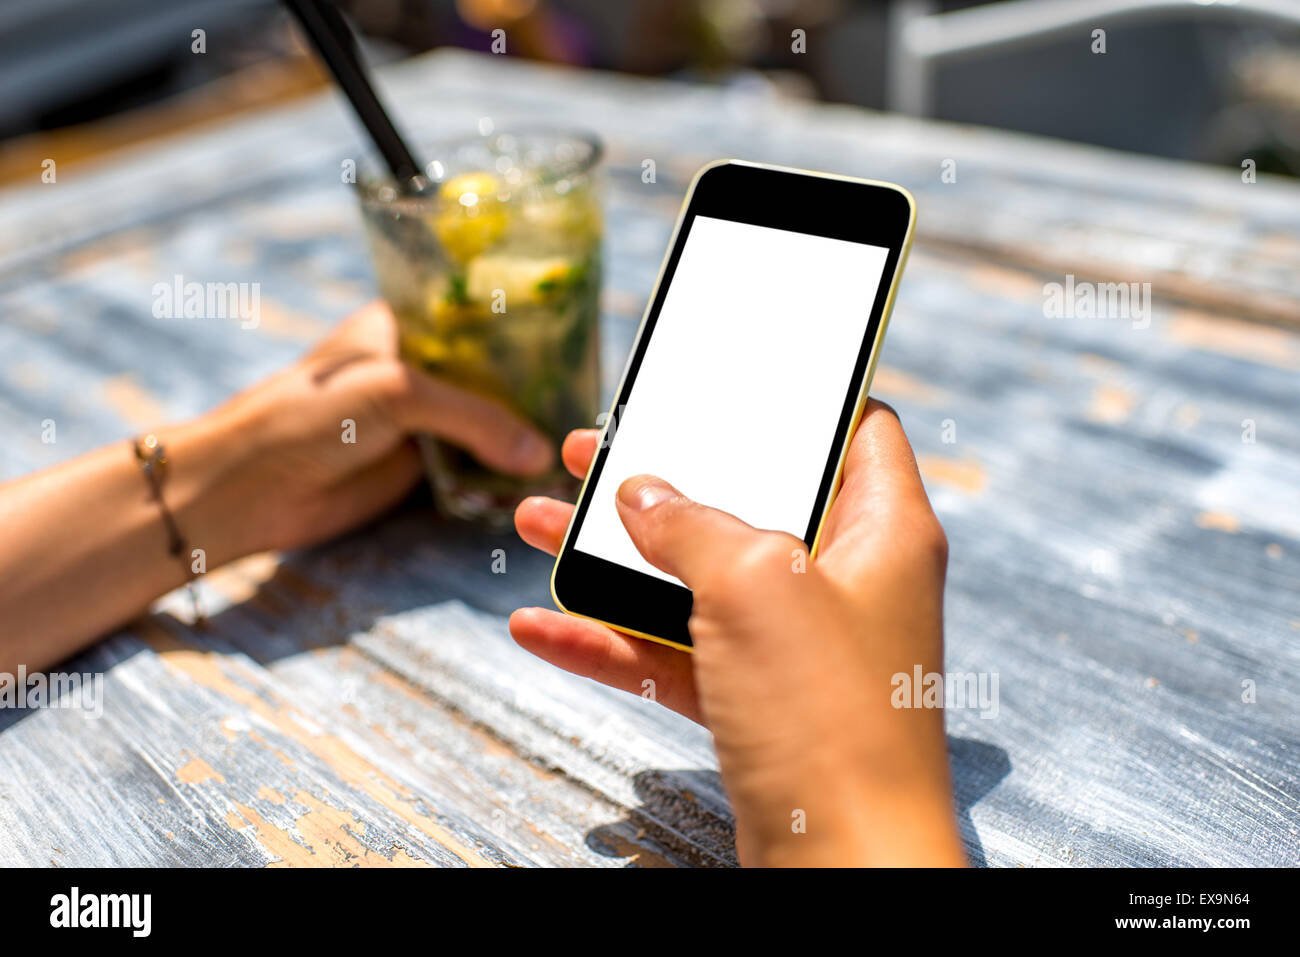 Female hand using a phone with isolated screen on wooden vintage table holding a glass with mohito Stock Photo